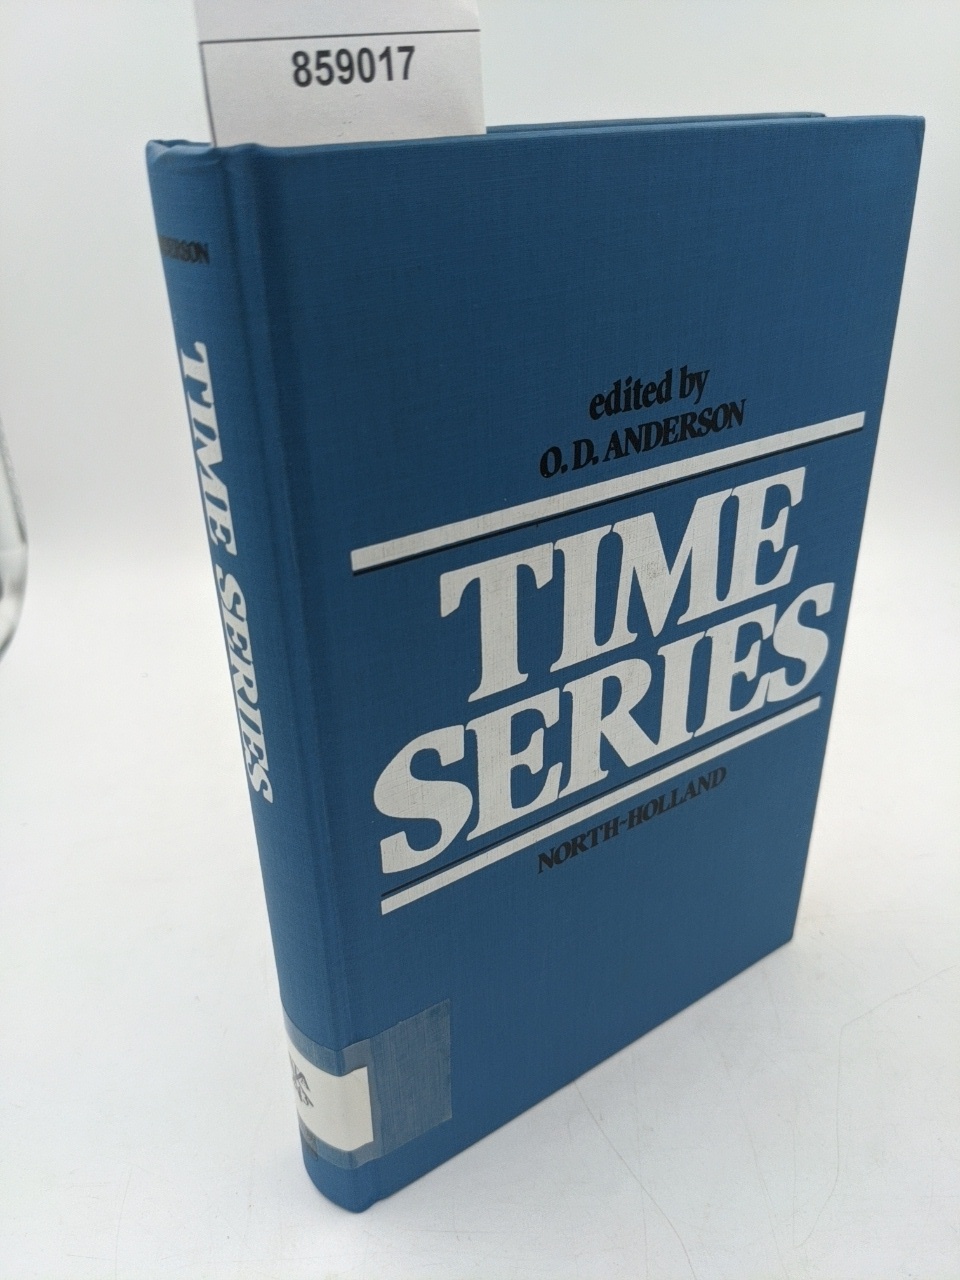 Anderson, O.D. (Ed.):  Time Series: Proceedings of the international Conference held at Nottingham University, March 1979. 